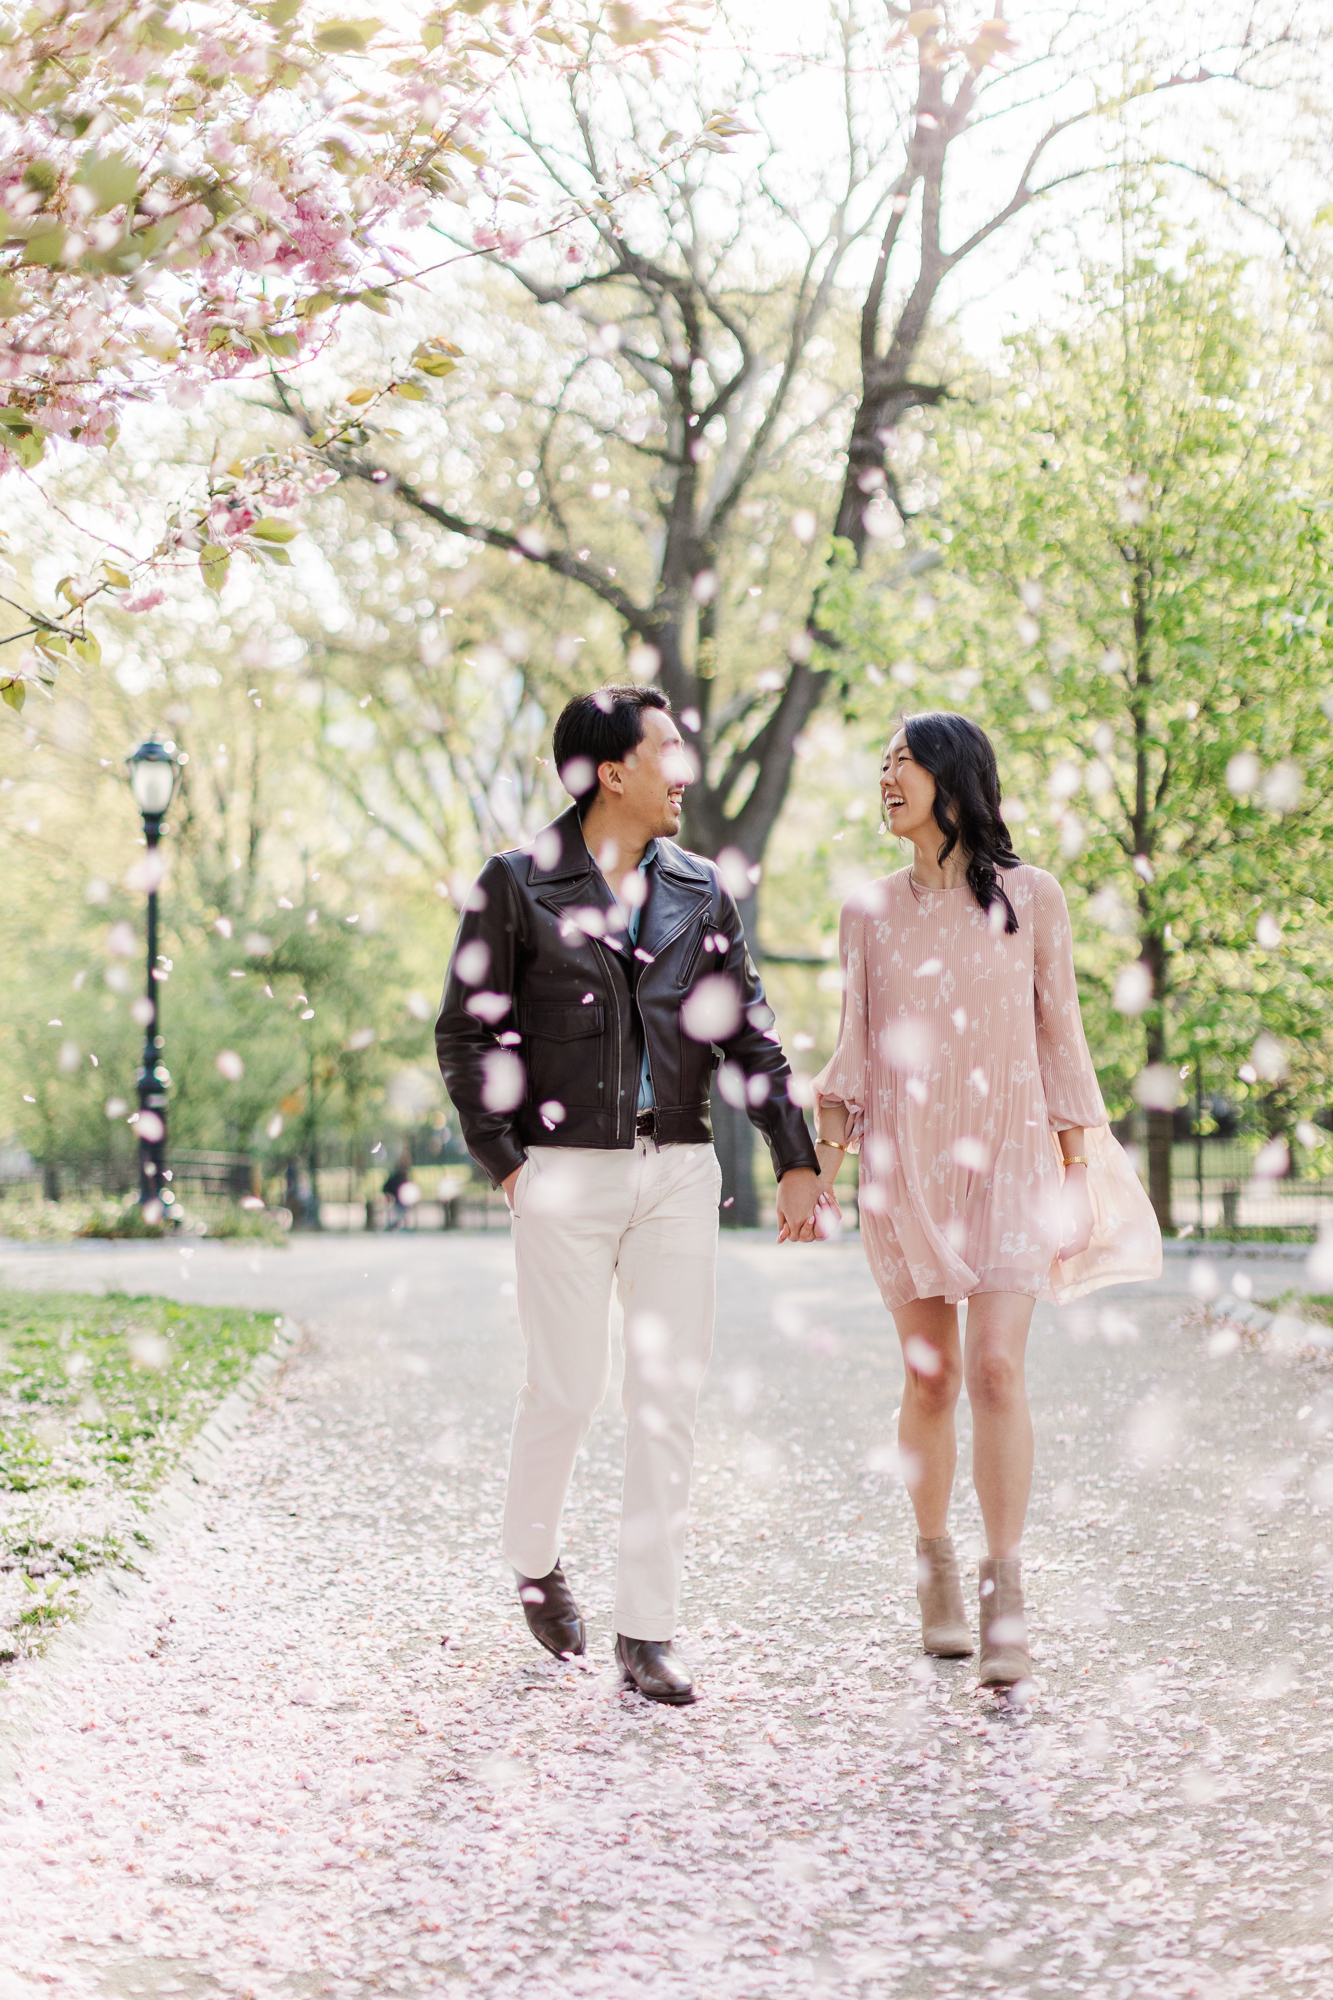 Awesome Engagement Photos With Cherry Blossoms in NYC